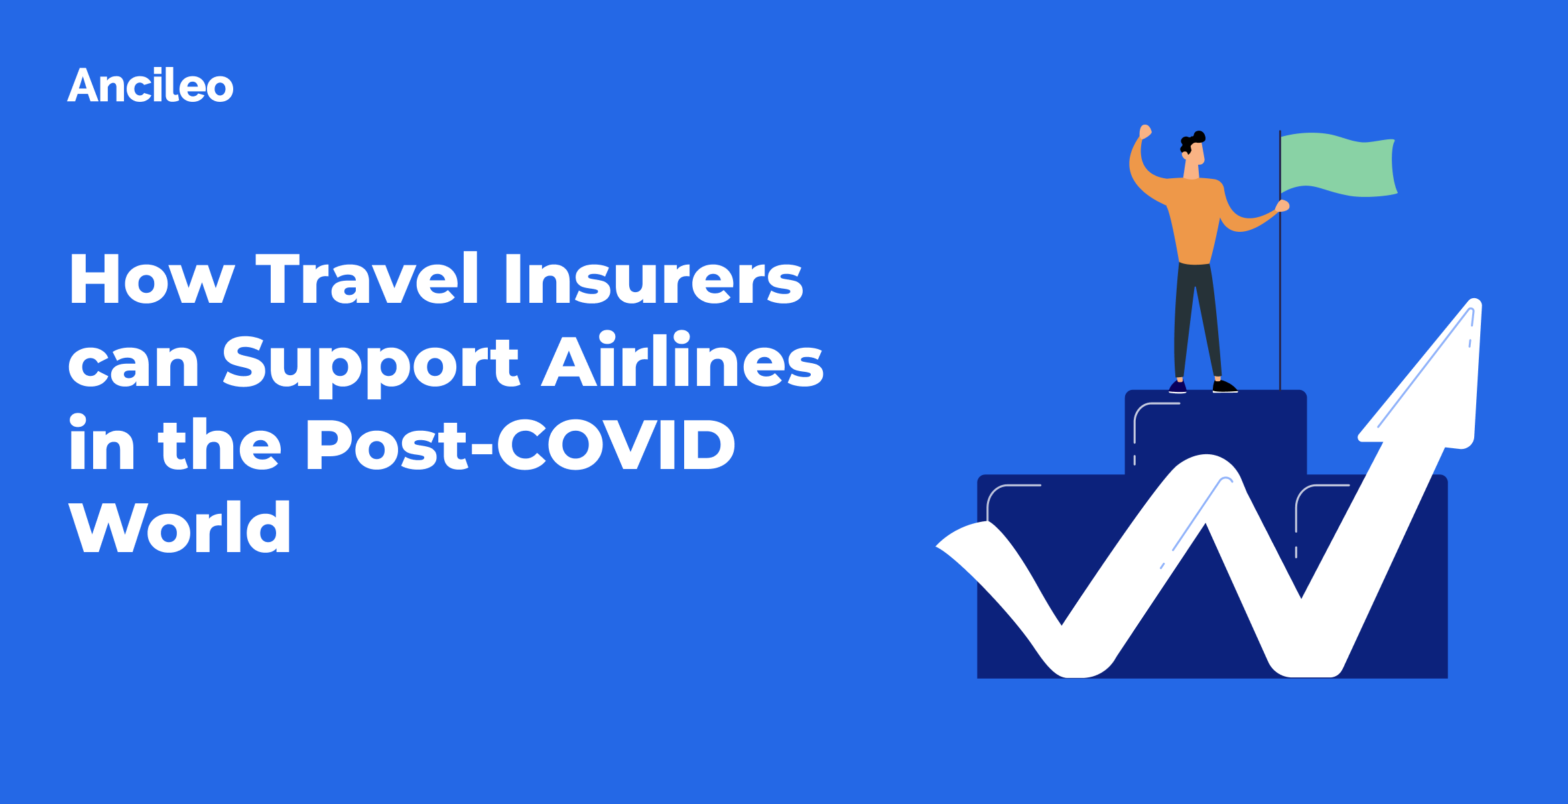 How Travel Insurers can Support Airlines in the Post-COVID World